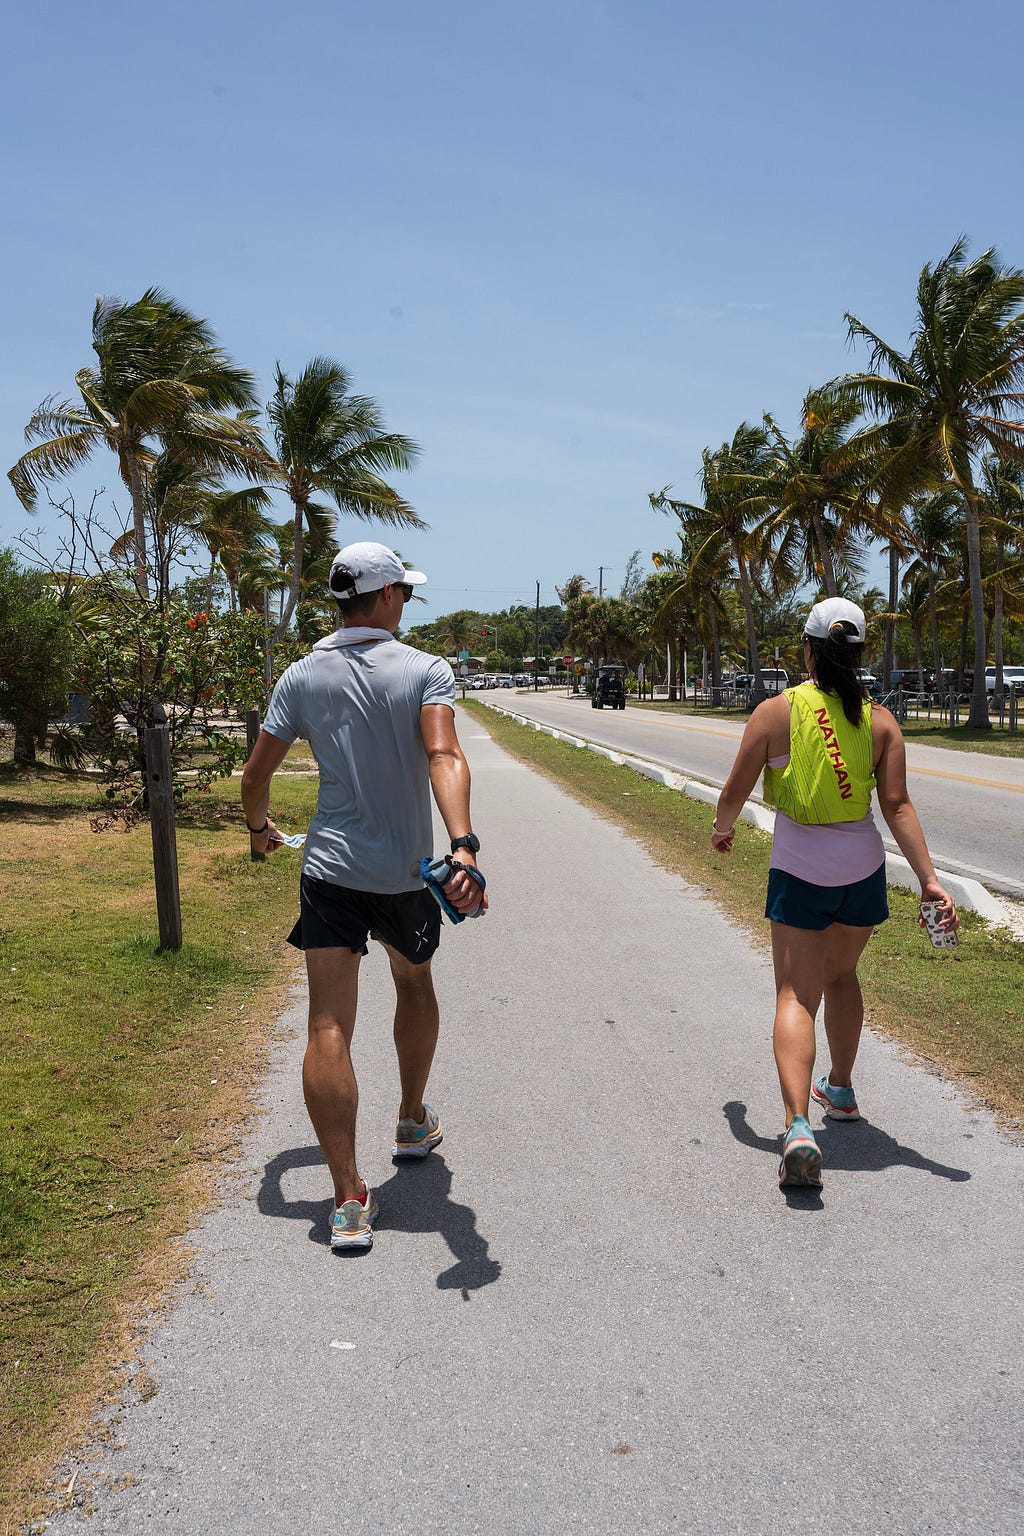 Photo of me walking on a sidewalk next to the road with palm trees on the sides. In the florida keys during the keys 100 race